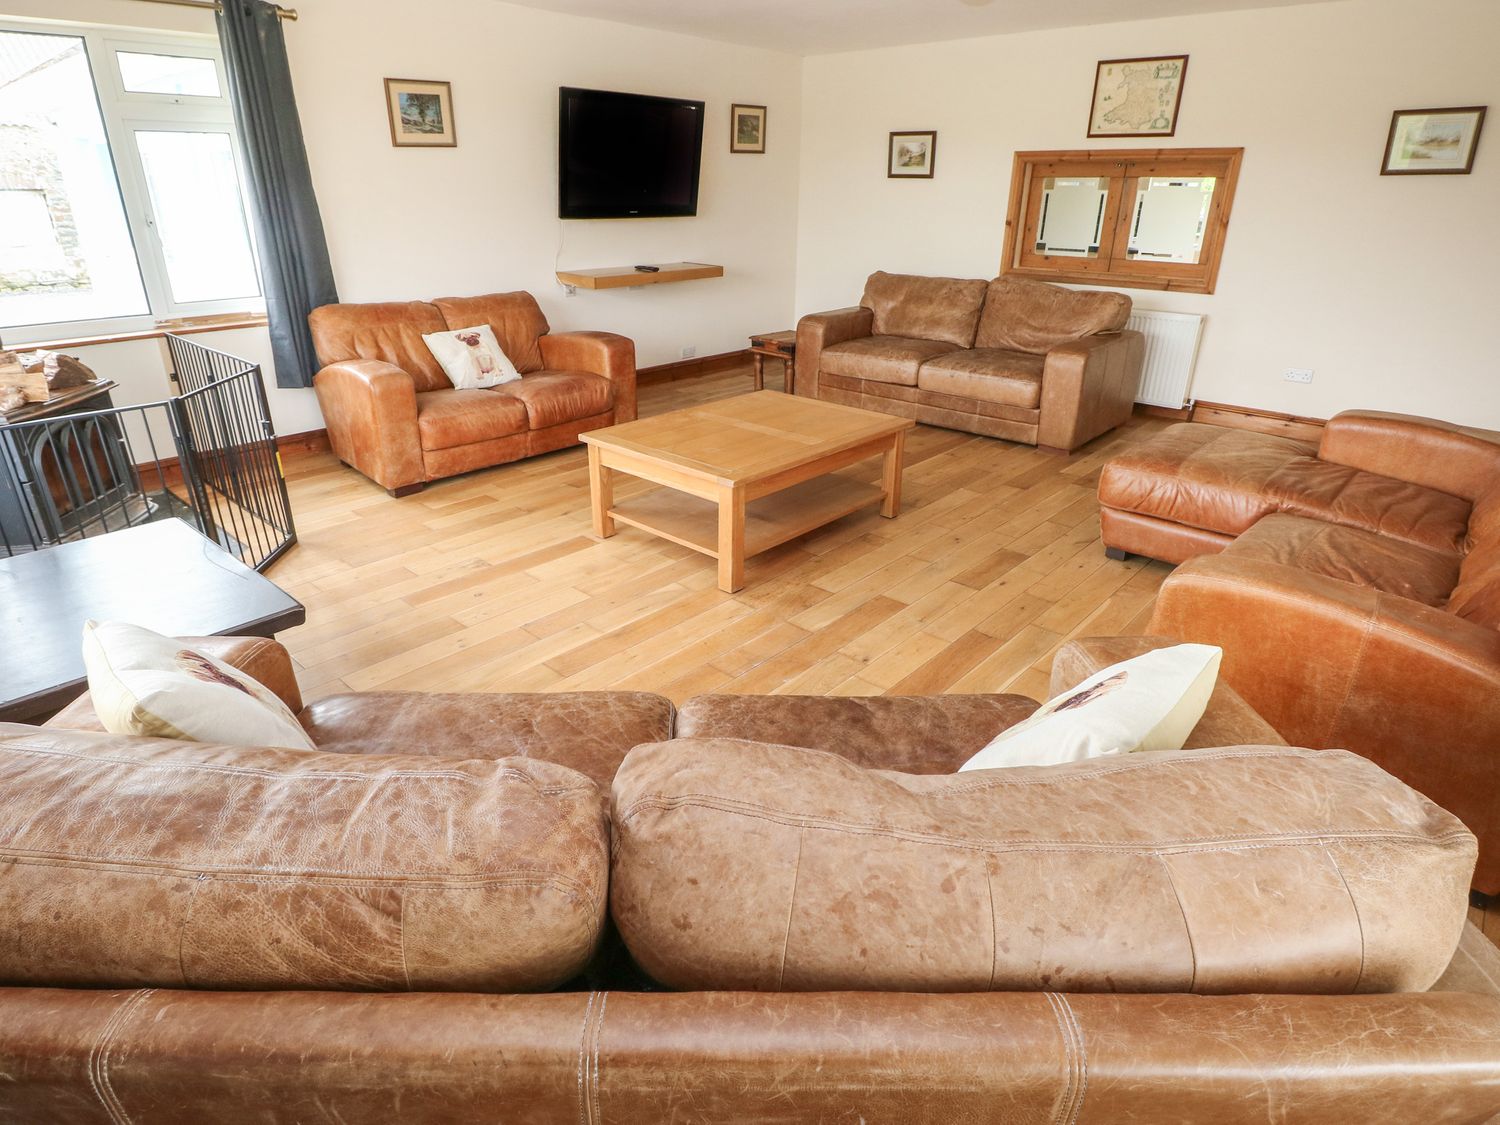 Ty Mawr is in Letterston, Pembrokeshire, pet-friendly, off-road parking, woodburner, on working farm